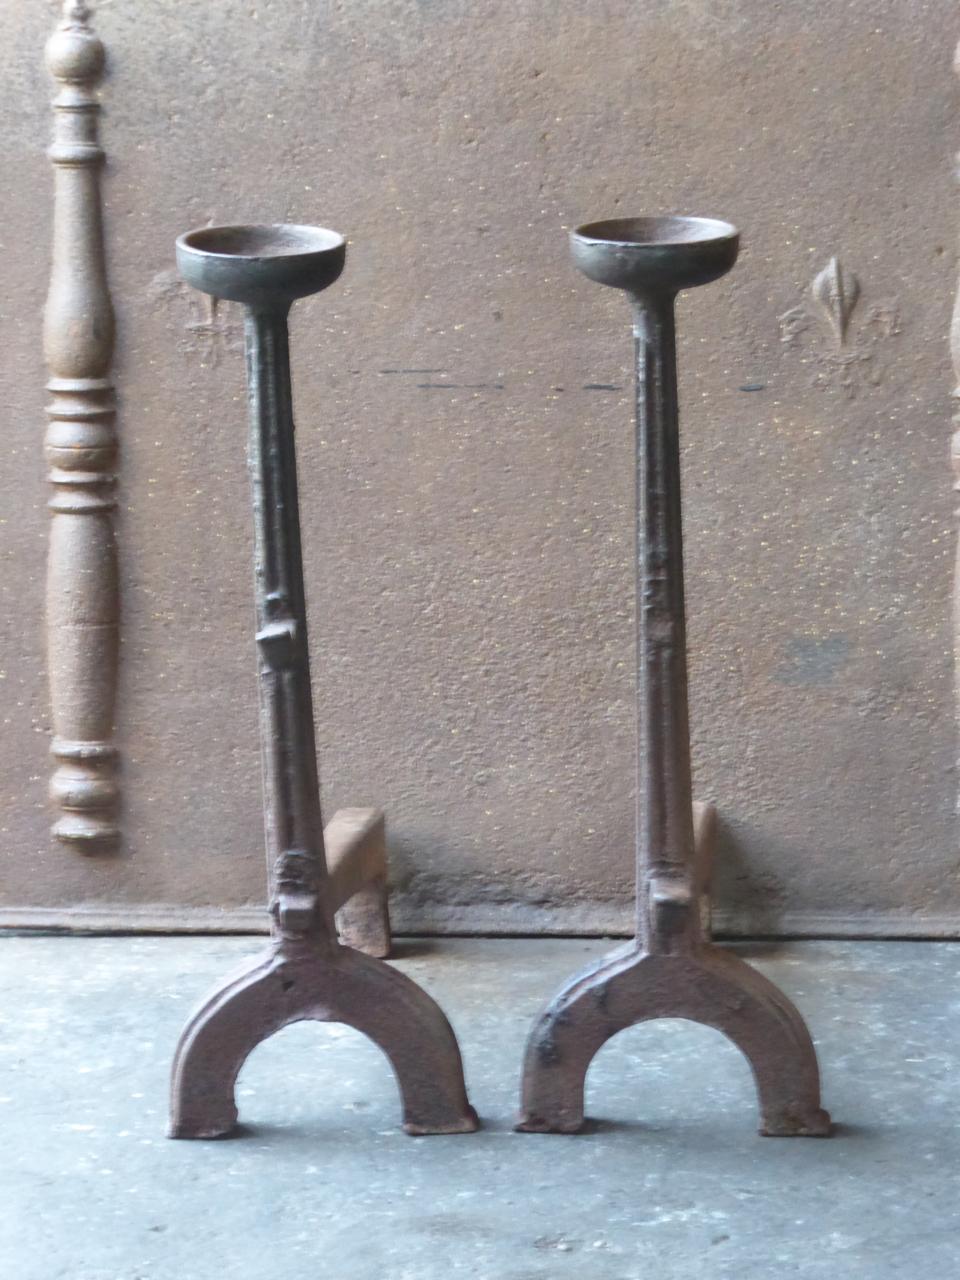 16th-17th century French Gothic andirons made of cast iron. The andirons have spit hooks to grill food. In France this type of very old andirons is called 'landiers'.

We have a unique and specialized collection of antique and used fireplace